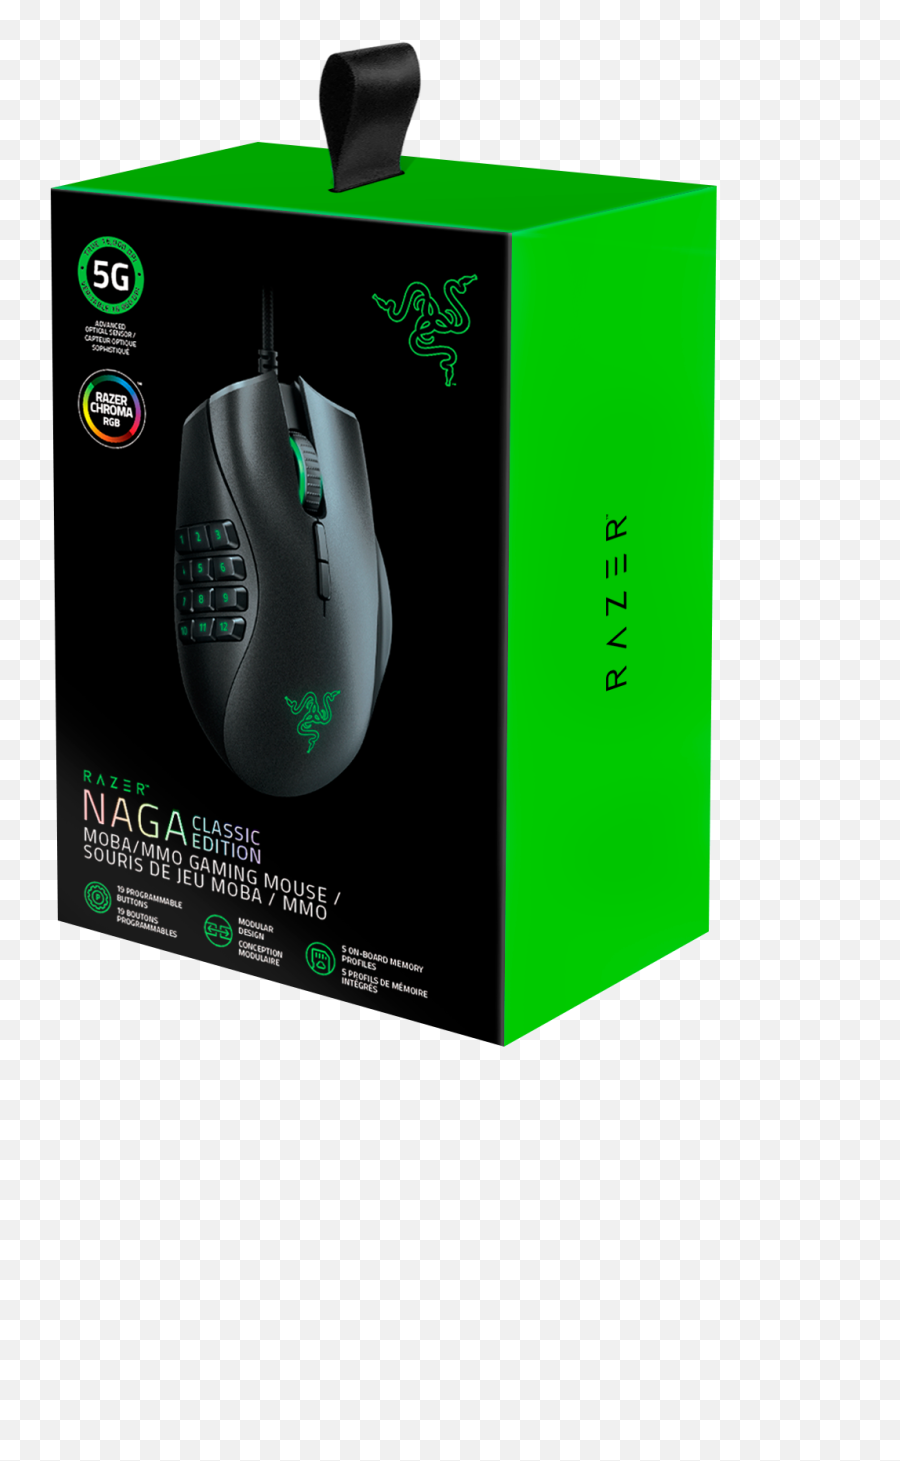 Naga Classic Edition - Multicolor Wired Mmo Gaming Mouse Razer Gaming Mouse Deathadder V2 Black Emoji,Emoticons Not Mause